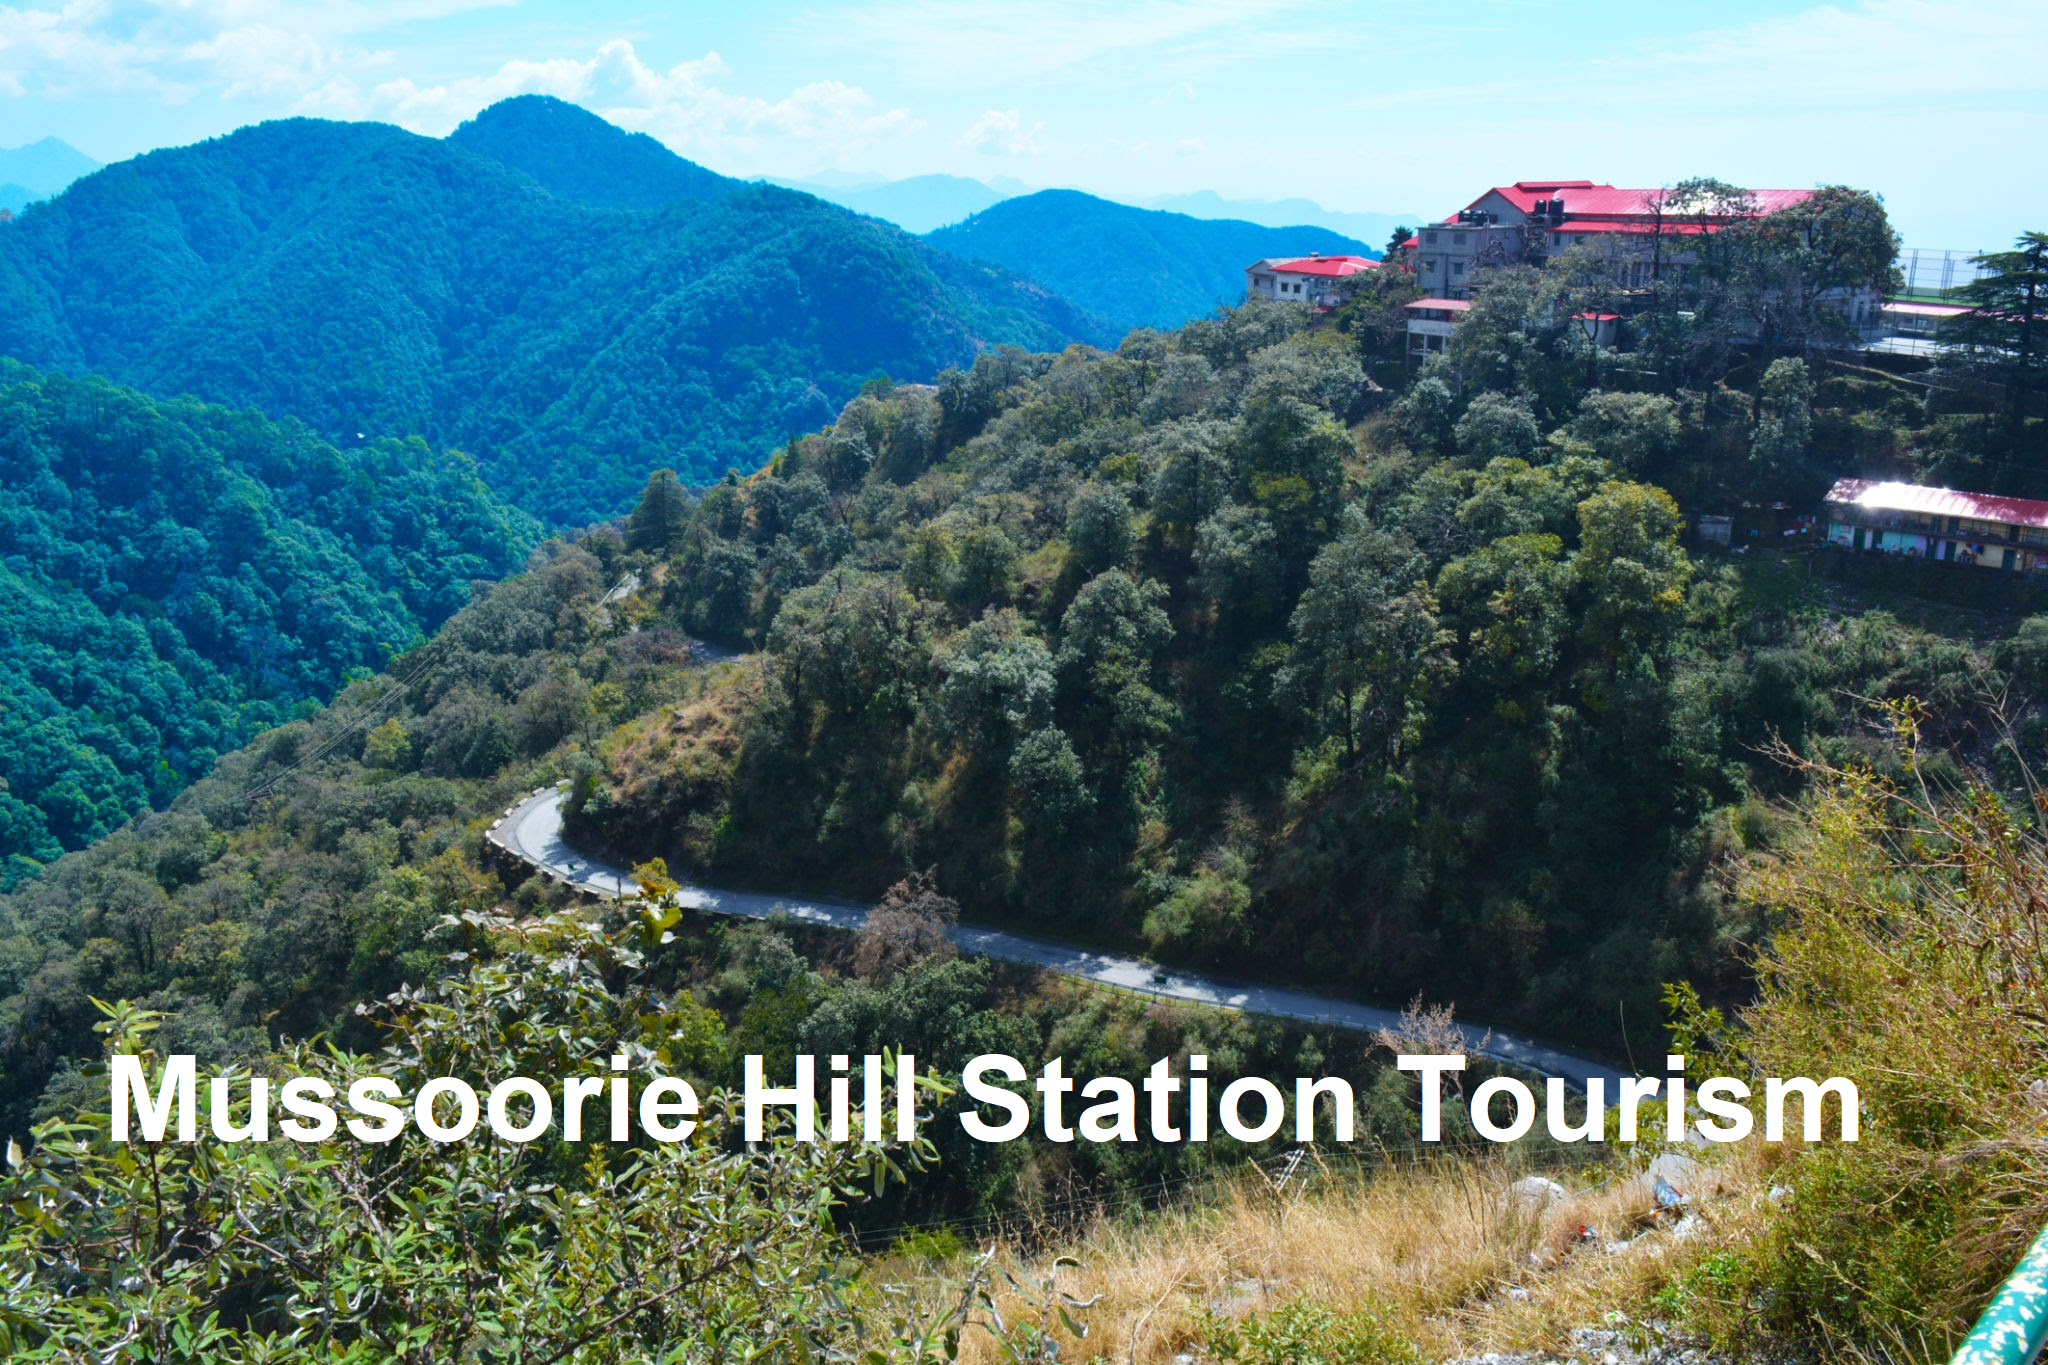 Mussoorie Hill Station Tourism